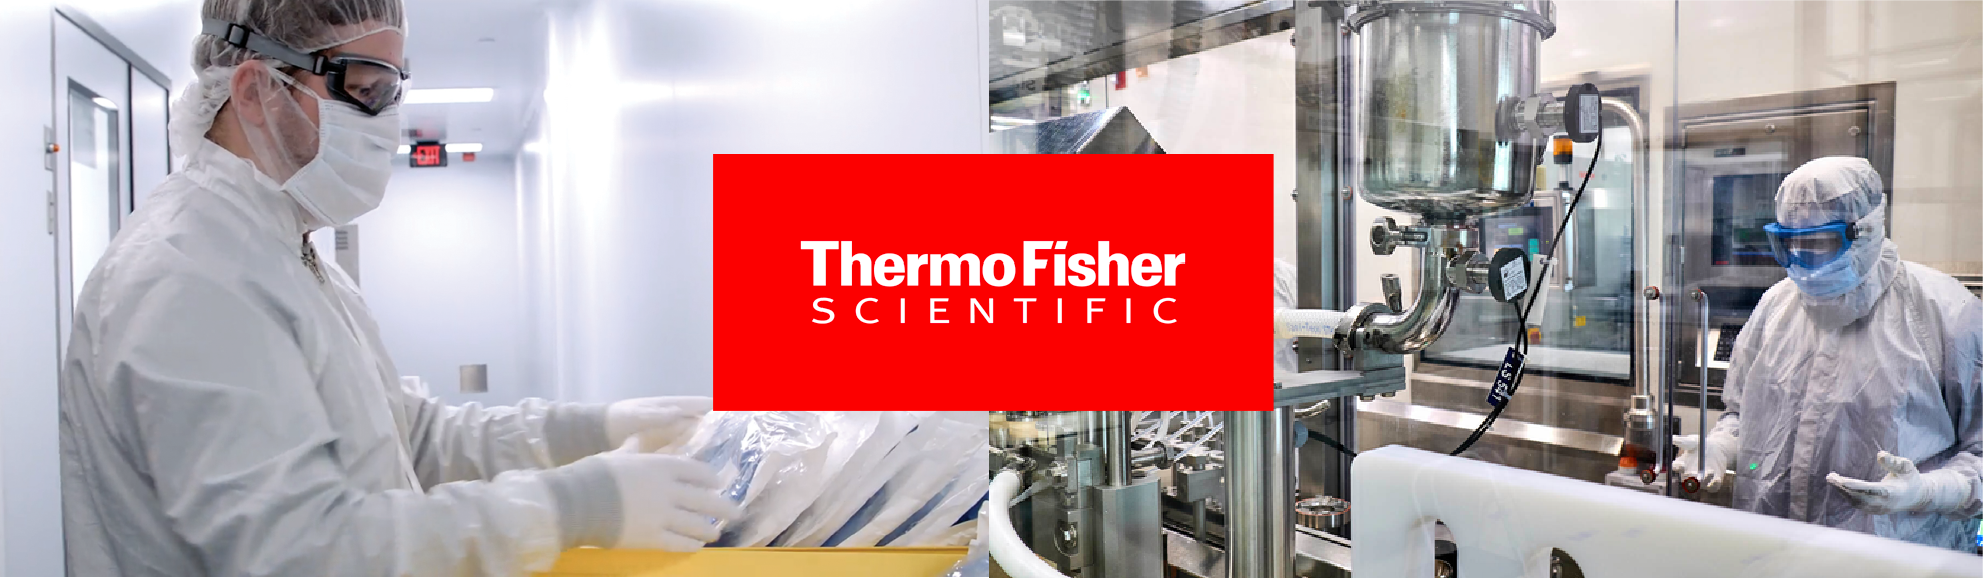 https://reverscore.com/wp-content/uploads/2021/09/thermofisher-04-1.png